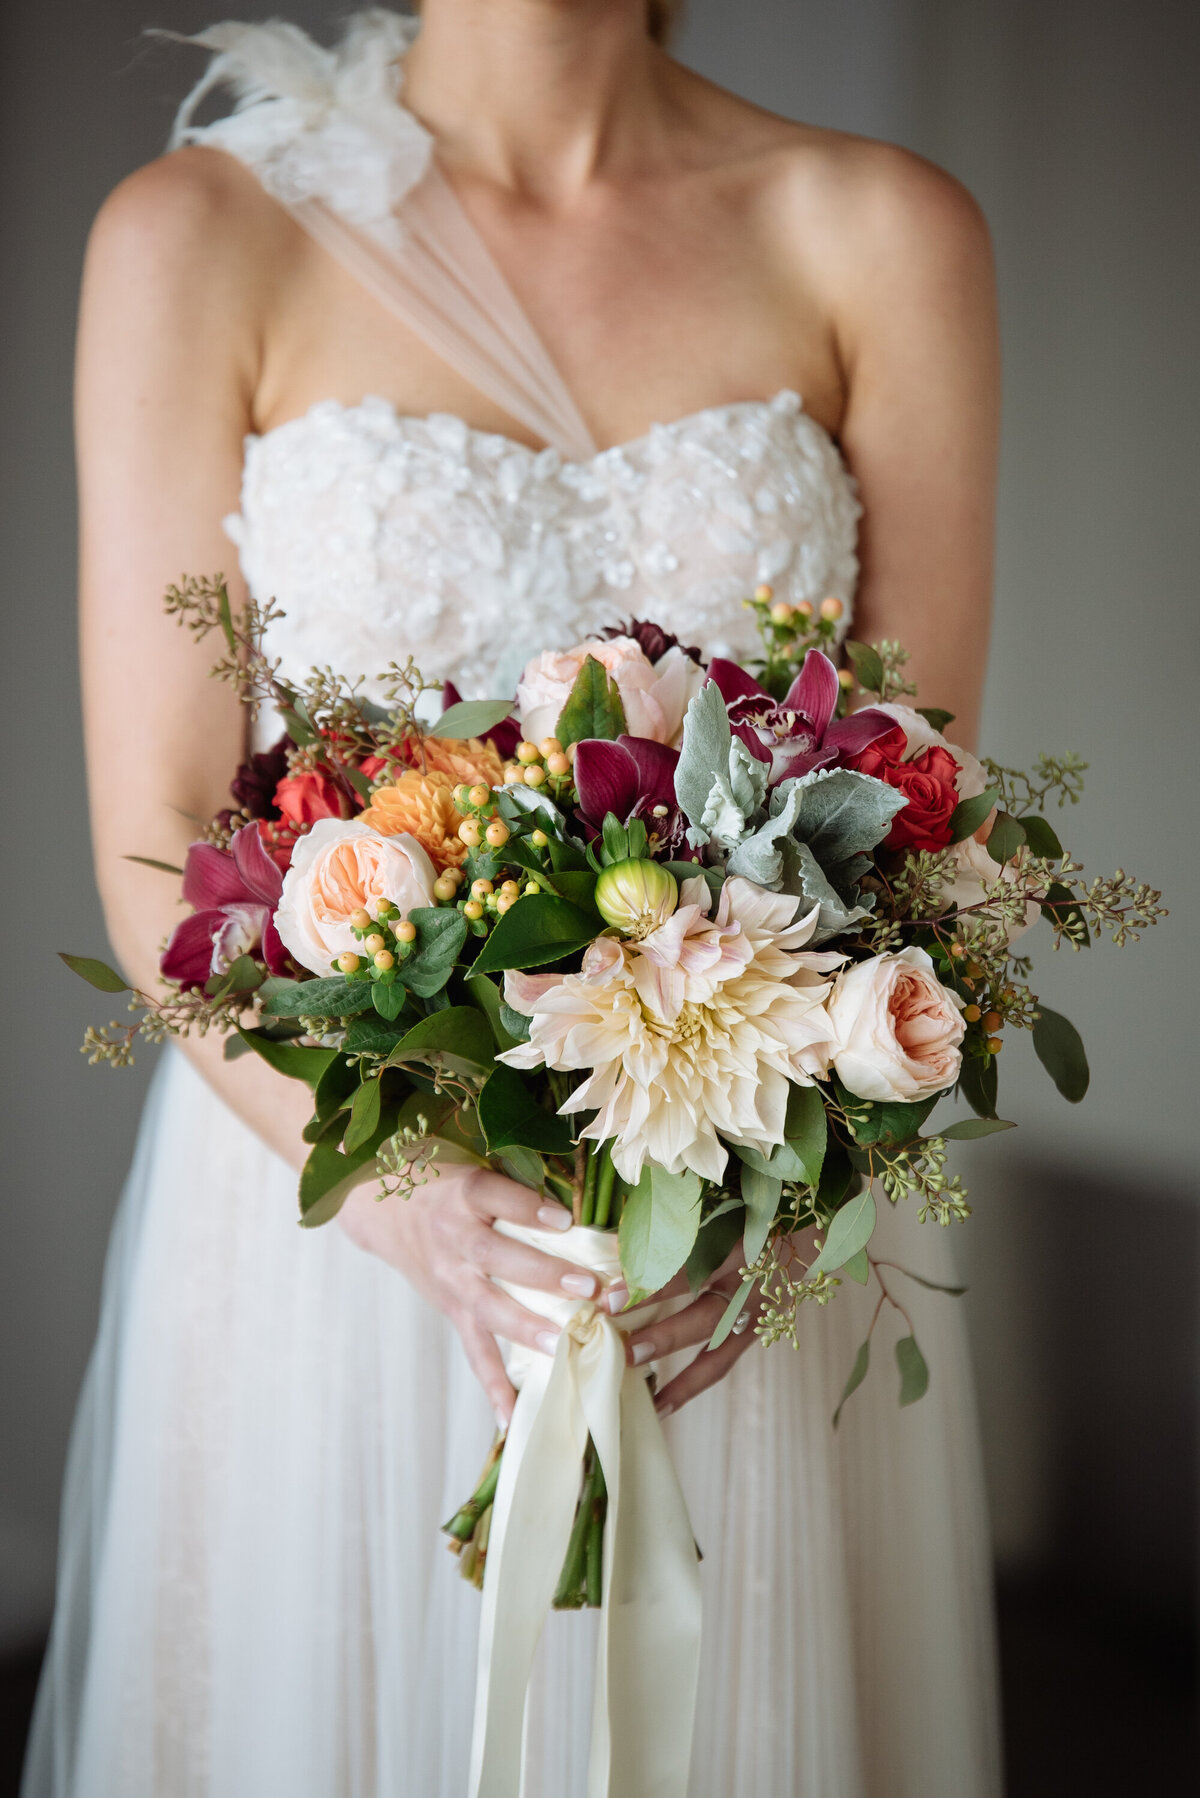 dahlia-bouquet-the-loading-dock-wedding-stamford-ct-enza-events